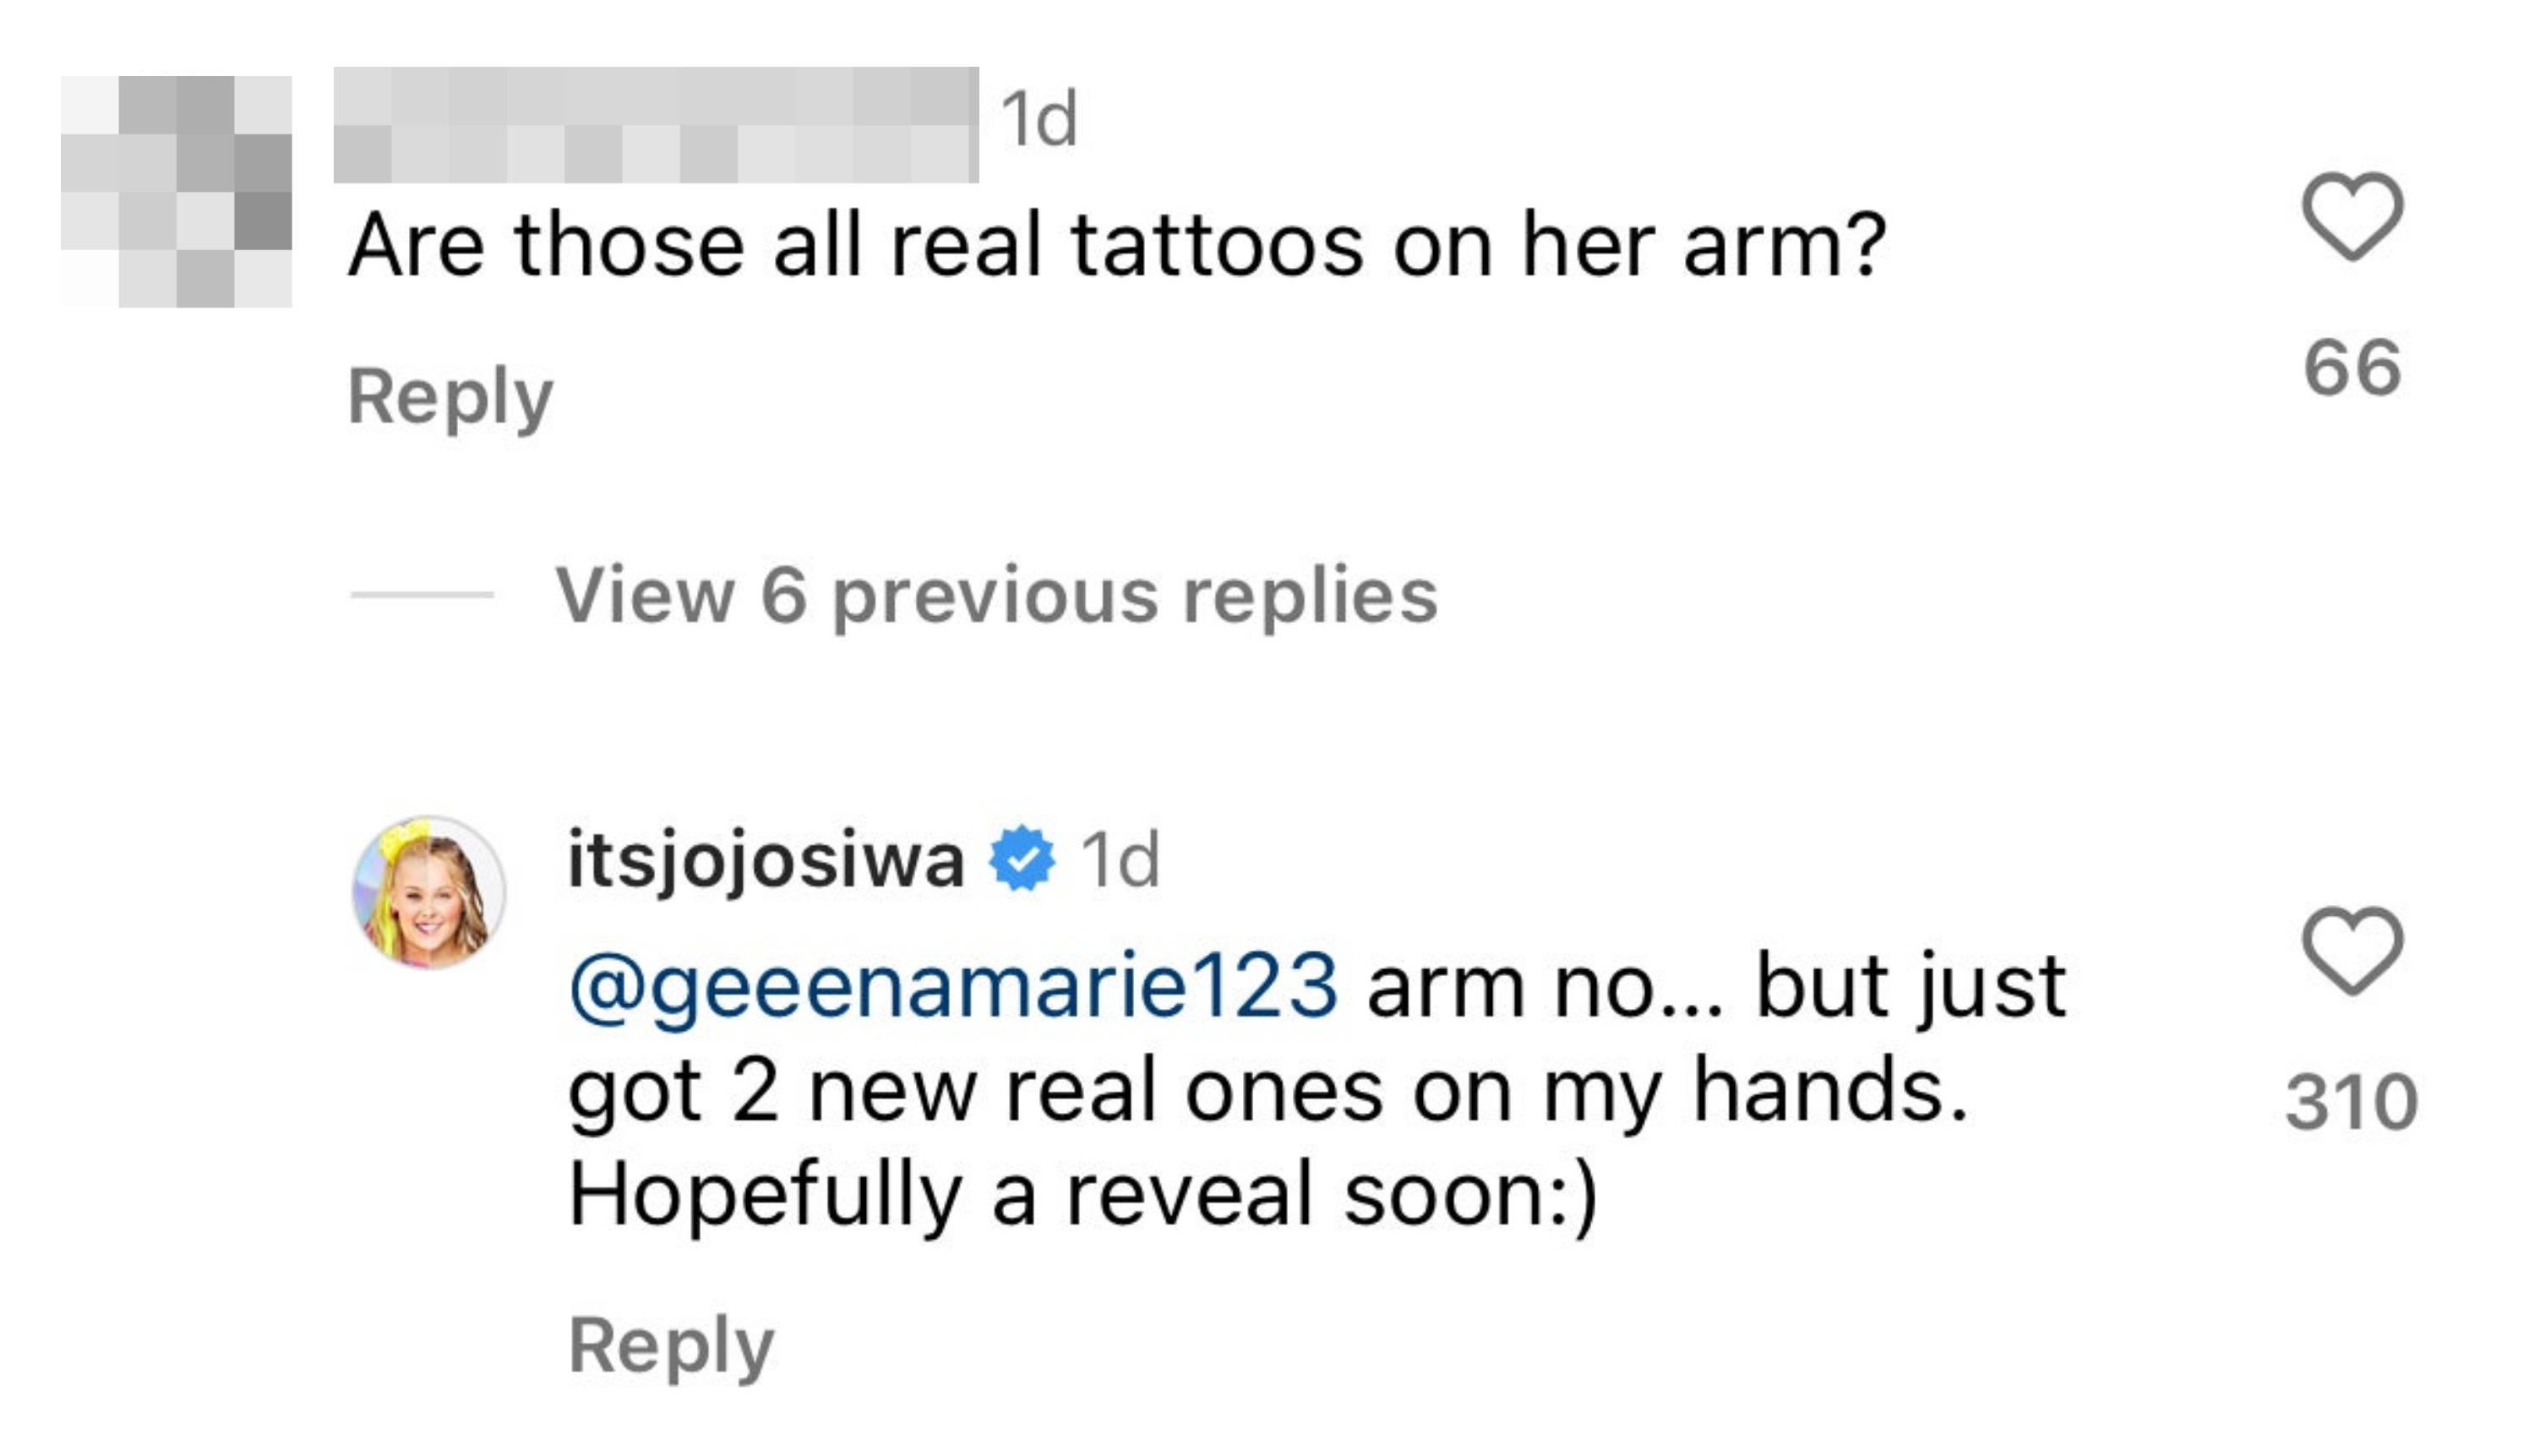 Comment thread where a user asks if tattoos on an arm are real and JoJo clarifies only the hand tattoos are real